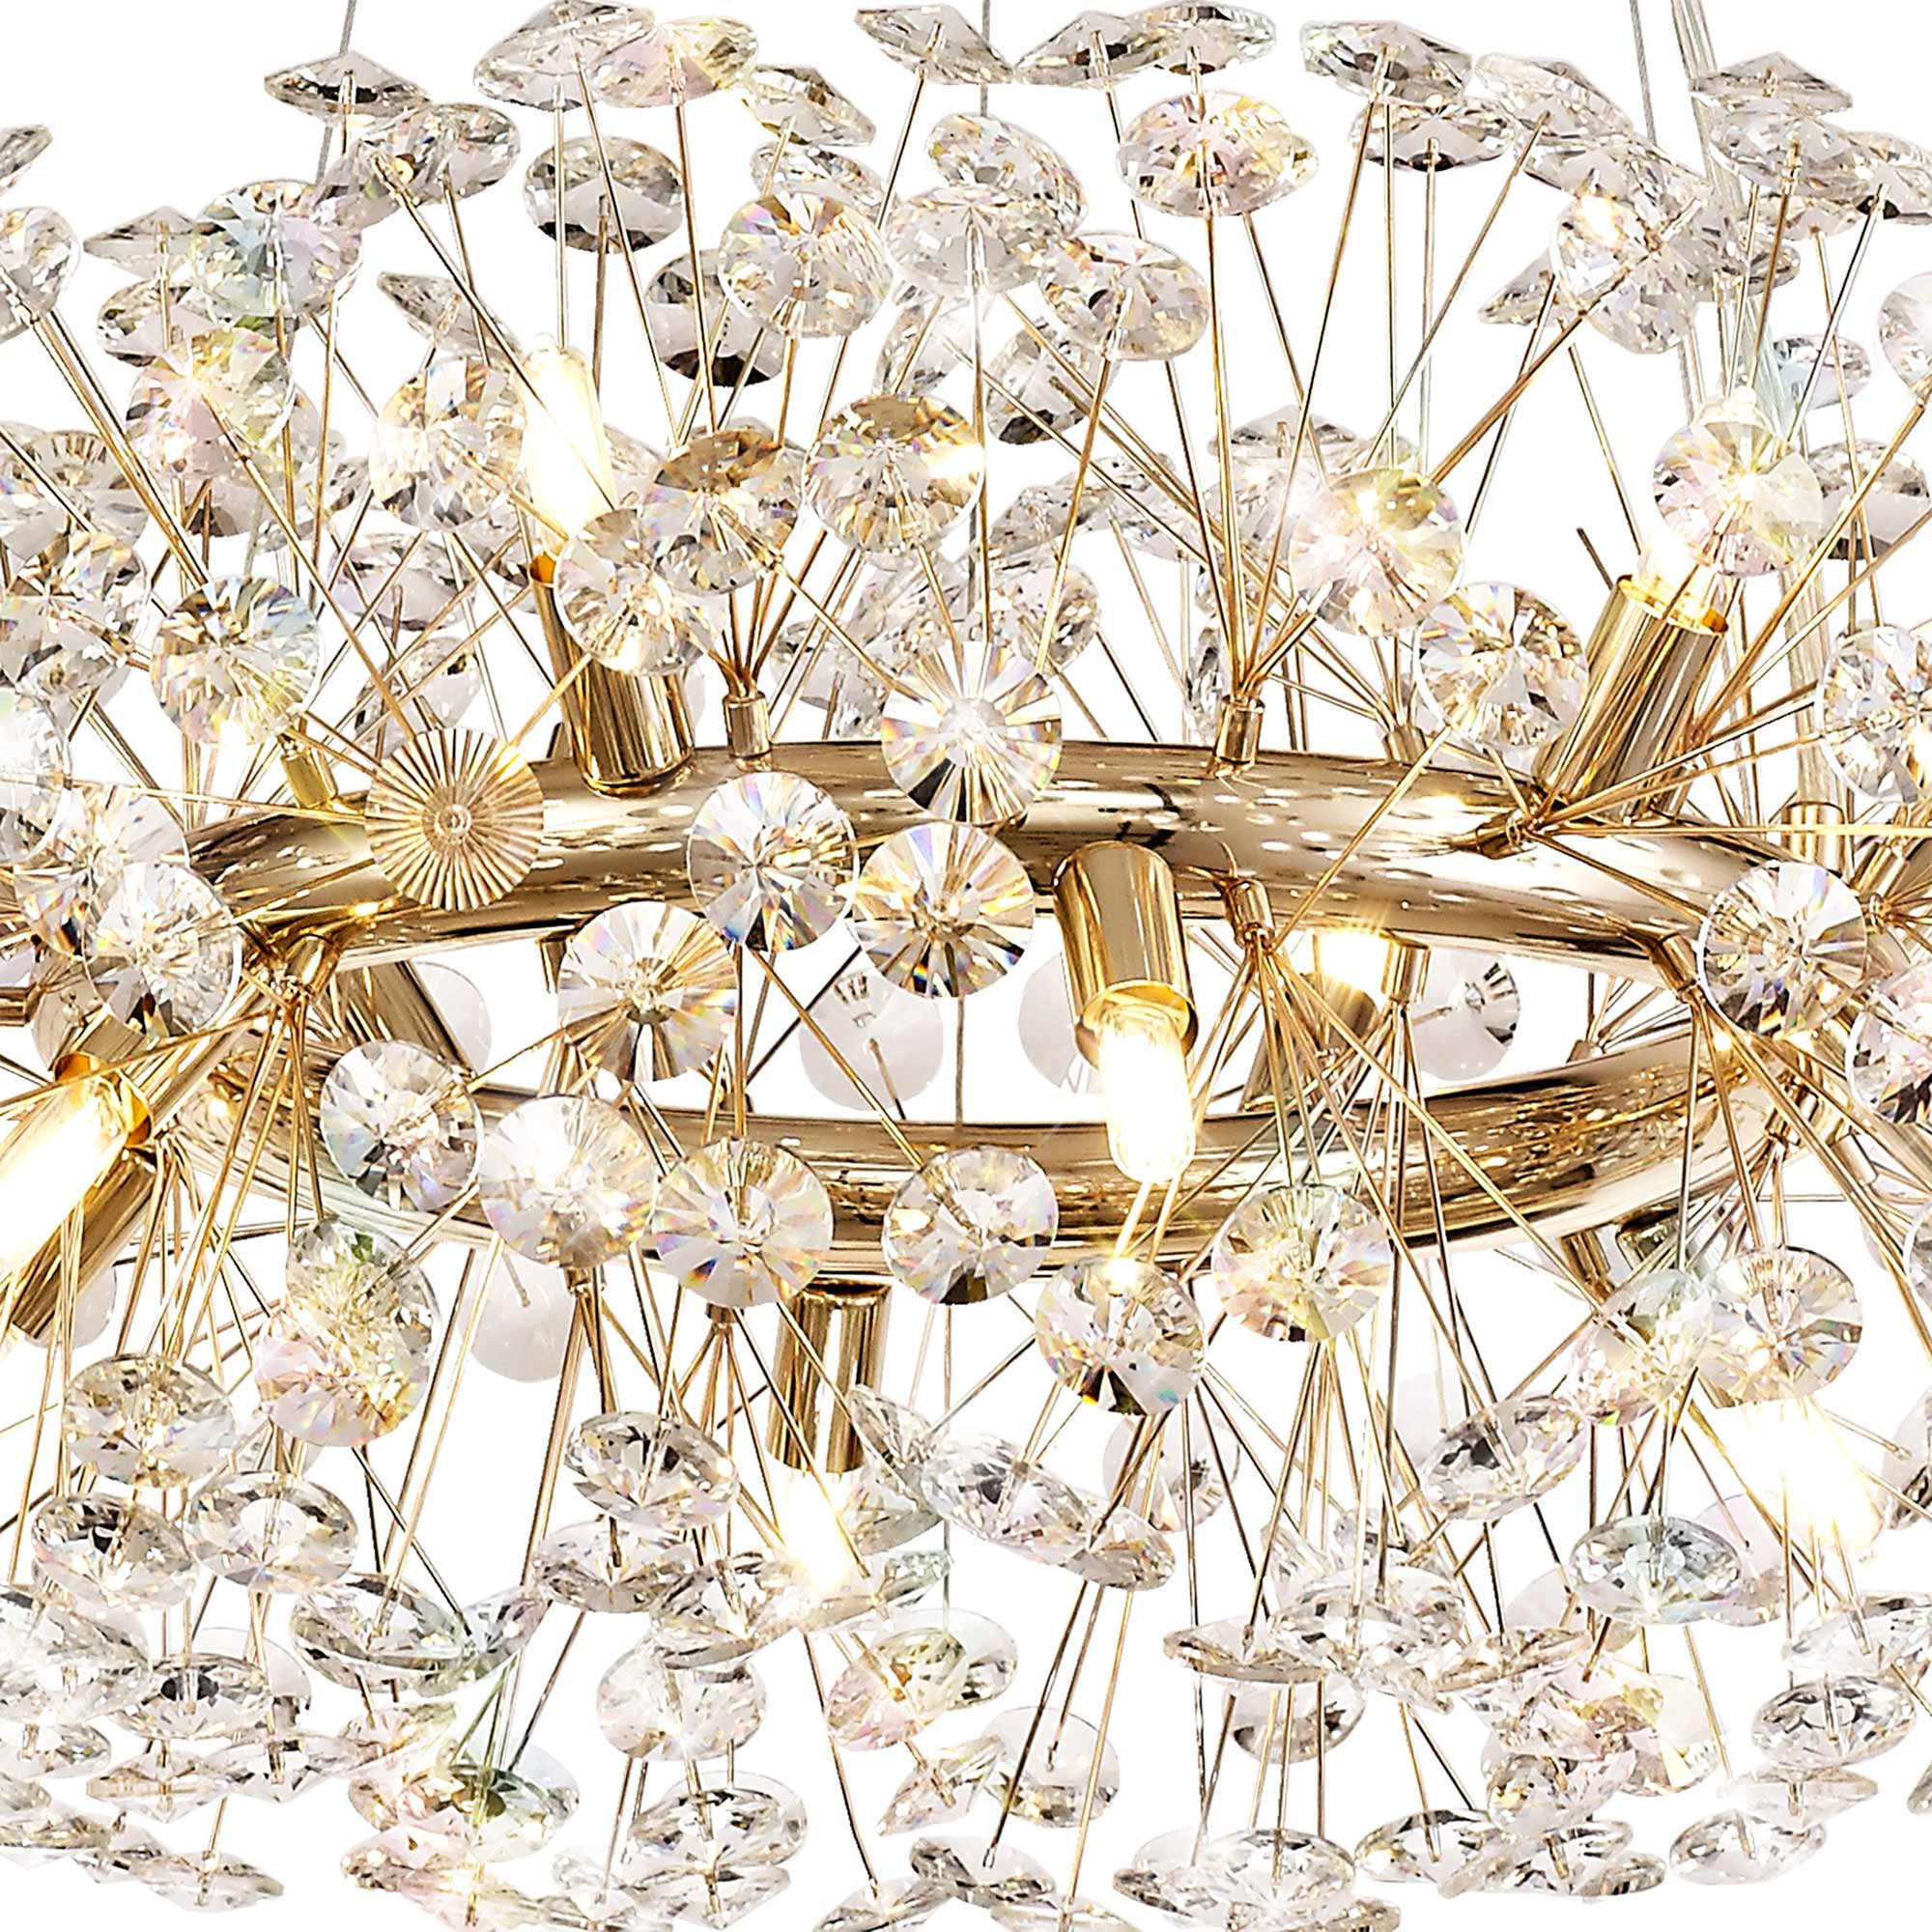 Chakkar Crystal Pendant Chandelier With 12 Lights - French Gold & Crystal